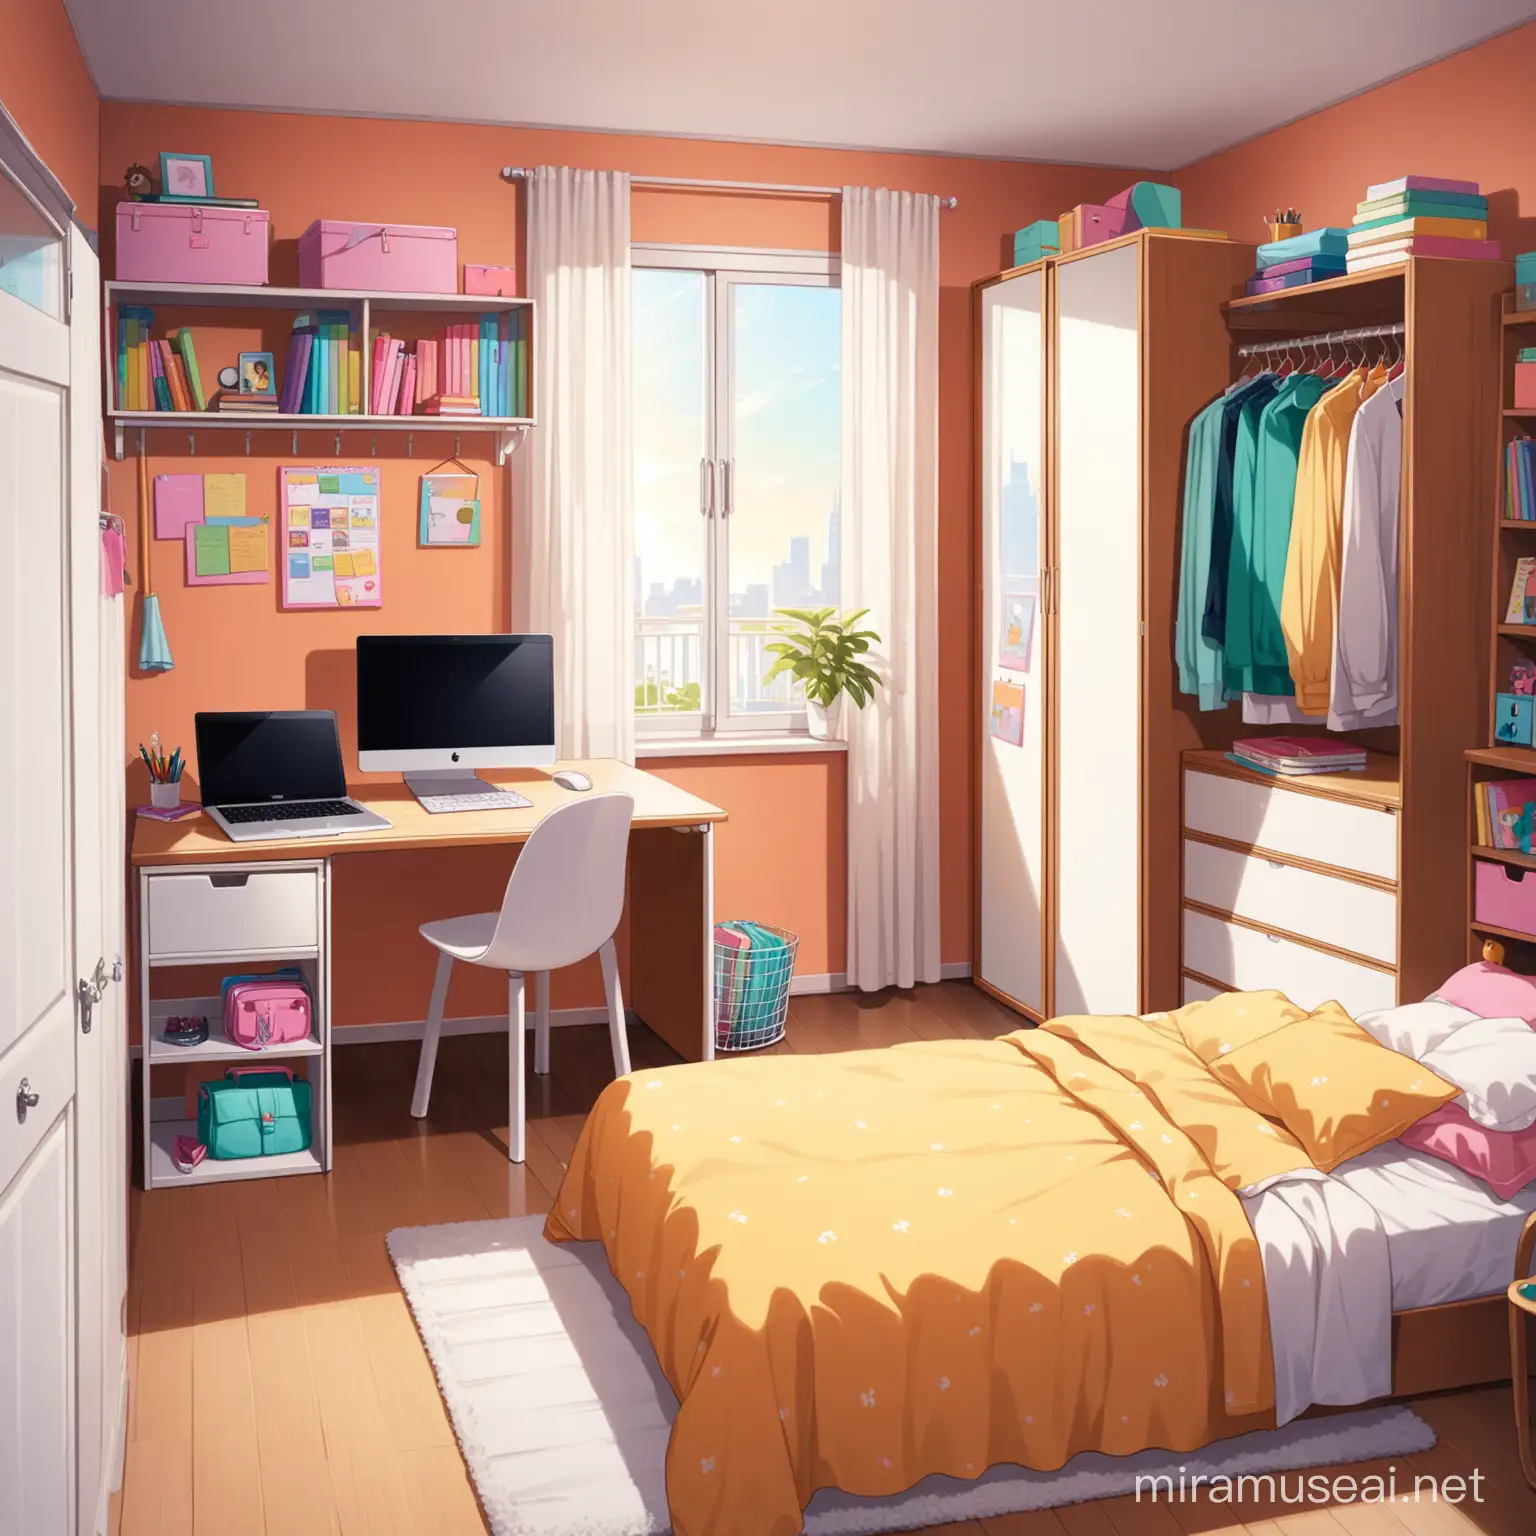 animated picture of the bedroom of a teenager and add a noticeboard, shelves, a wardrobe with clothes in it, a desk, a chair, books, a mirror, a laptop, an umbrella, a balcony